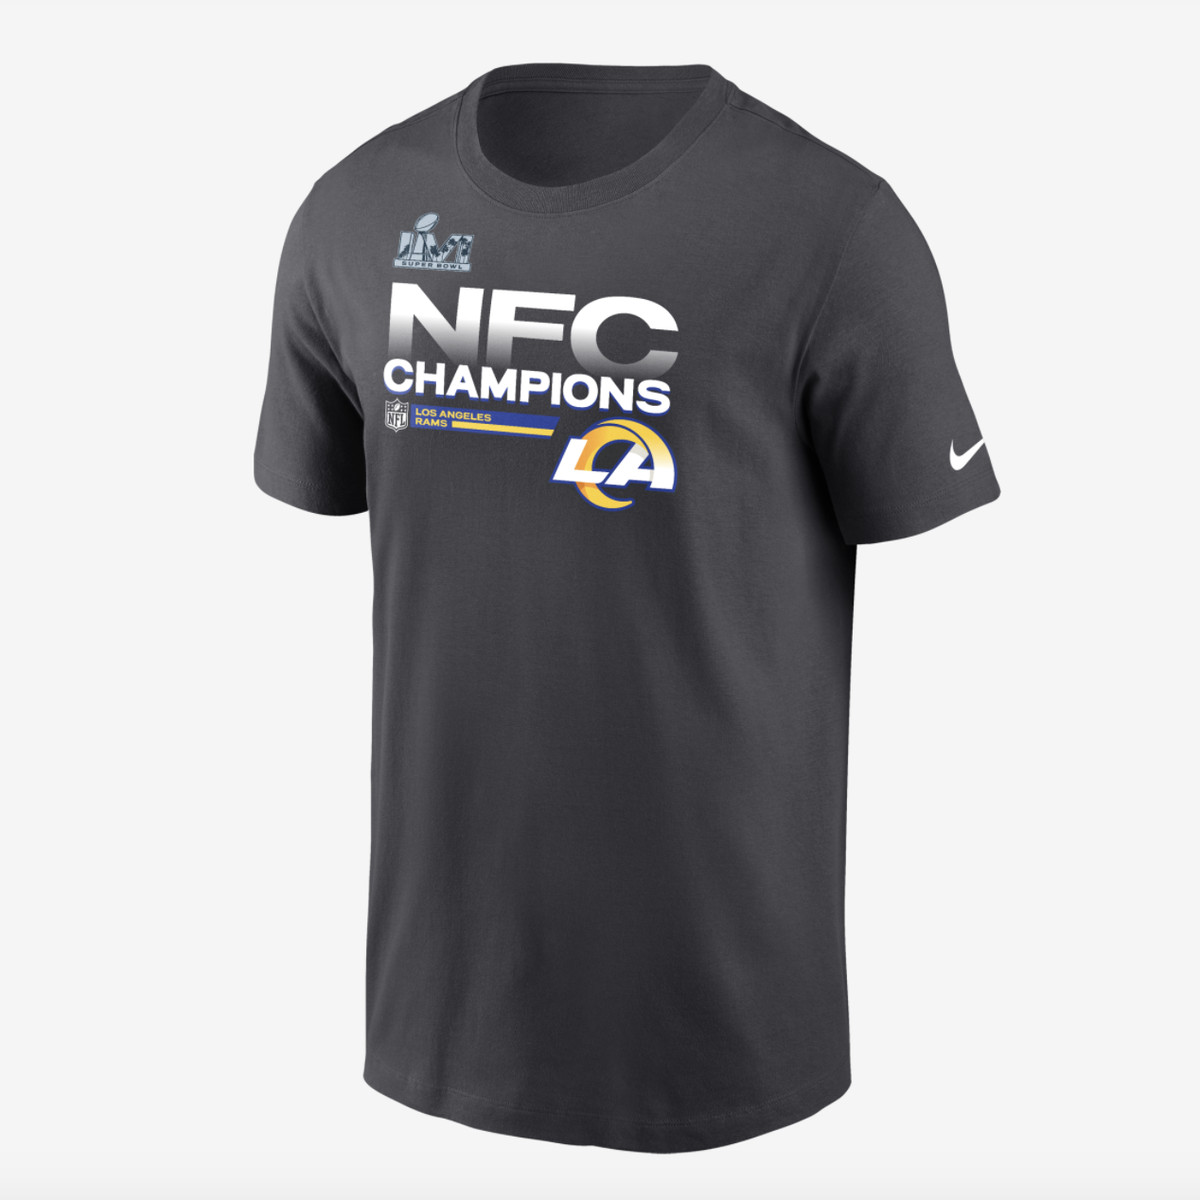 Rams Super Bowl merch: t-shirts, hoodies, and more! - Turf Show Times